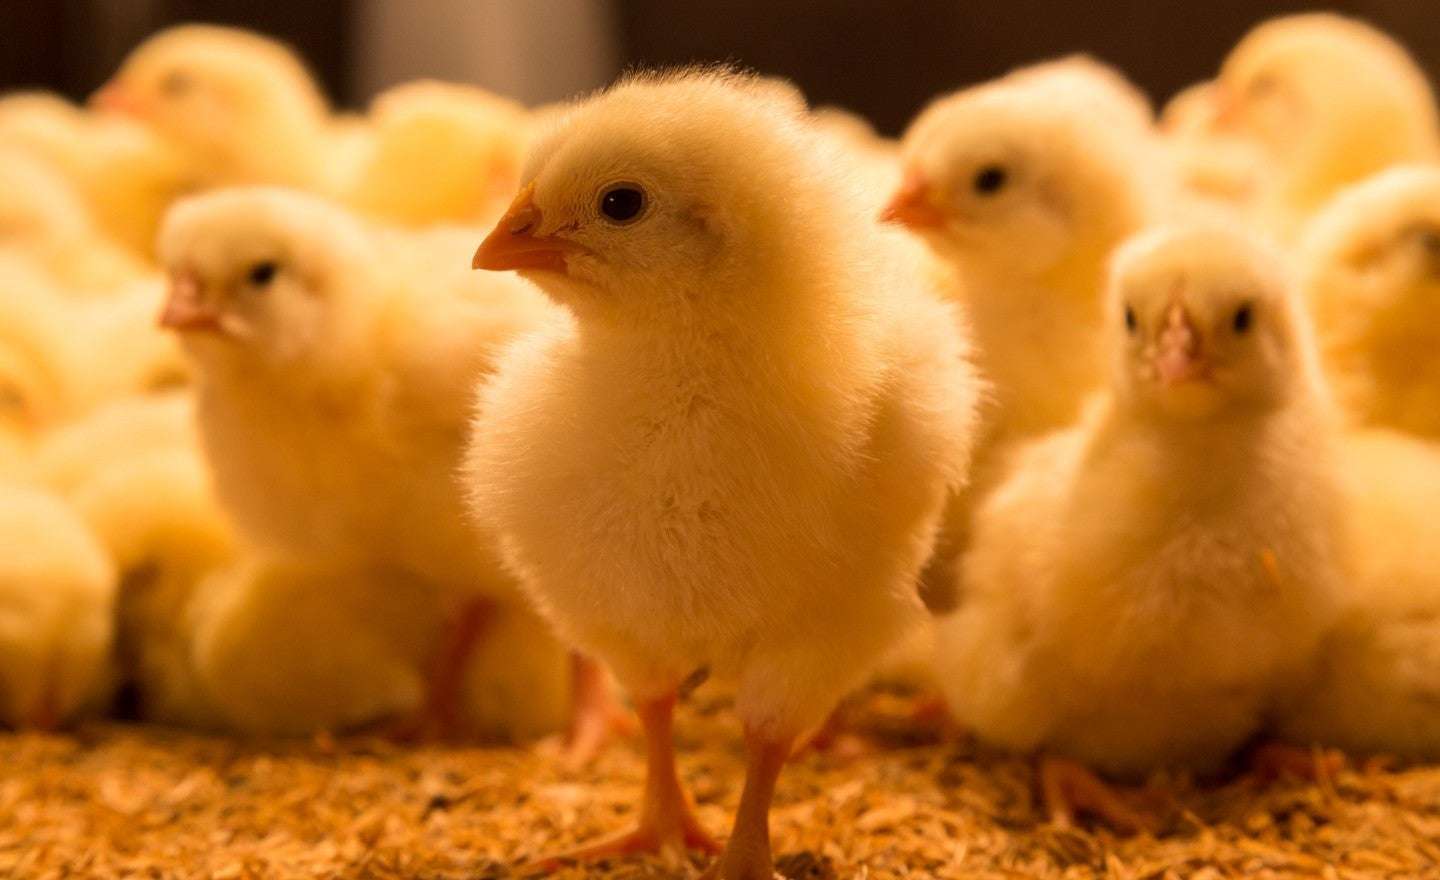 image for USPS changes blamed for deliveries of thousands of dead chicks: 'We've never had a problem like this before'